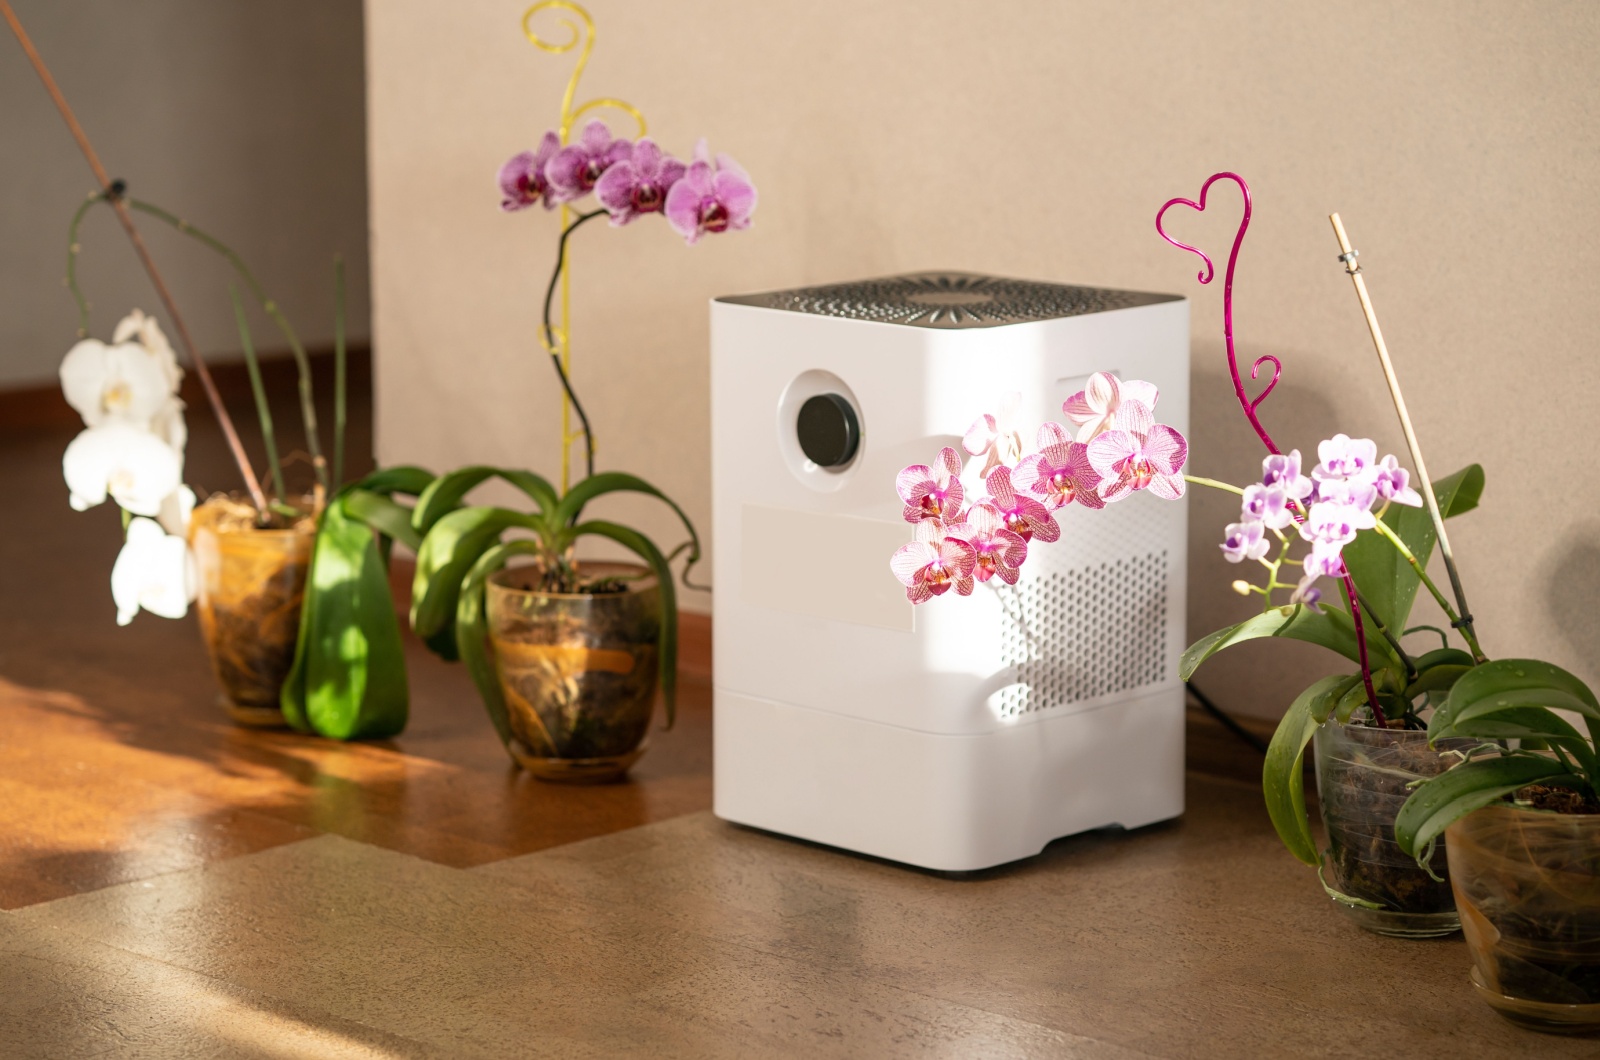 humidifier near orchid